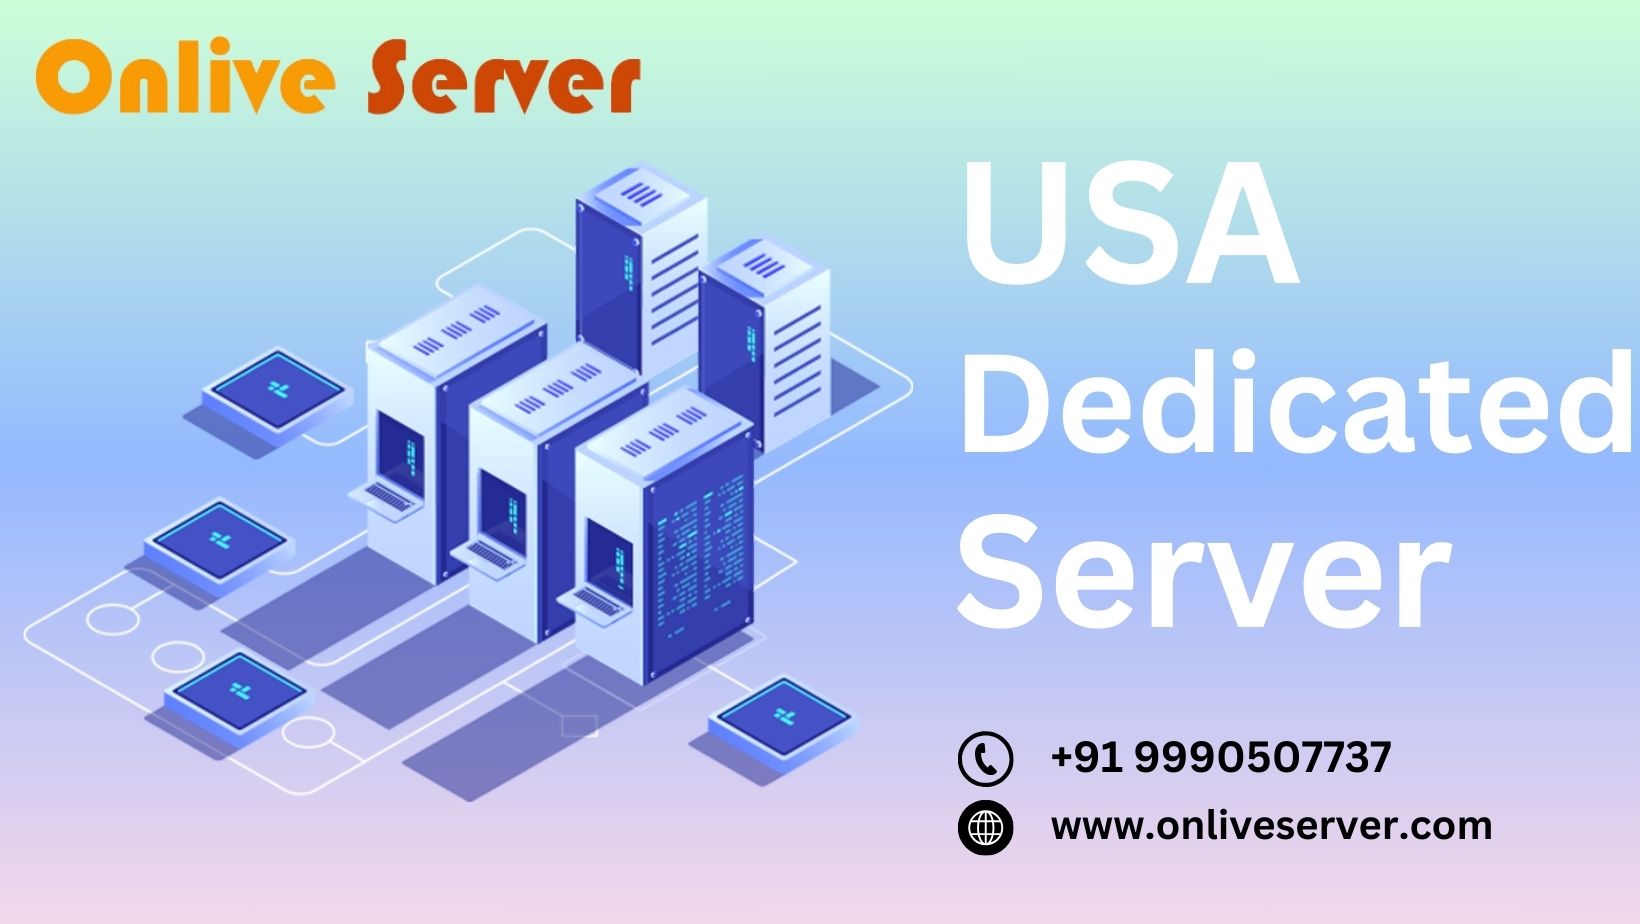 A USA Dedicated Server is a hosting solution where an entire server is exclusively dedicated to a single client or business. This means that all the server resources, including CPU, RAM, storage, and bandwidth, are solely used for that client's websites or applications. Unlike shared hosting